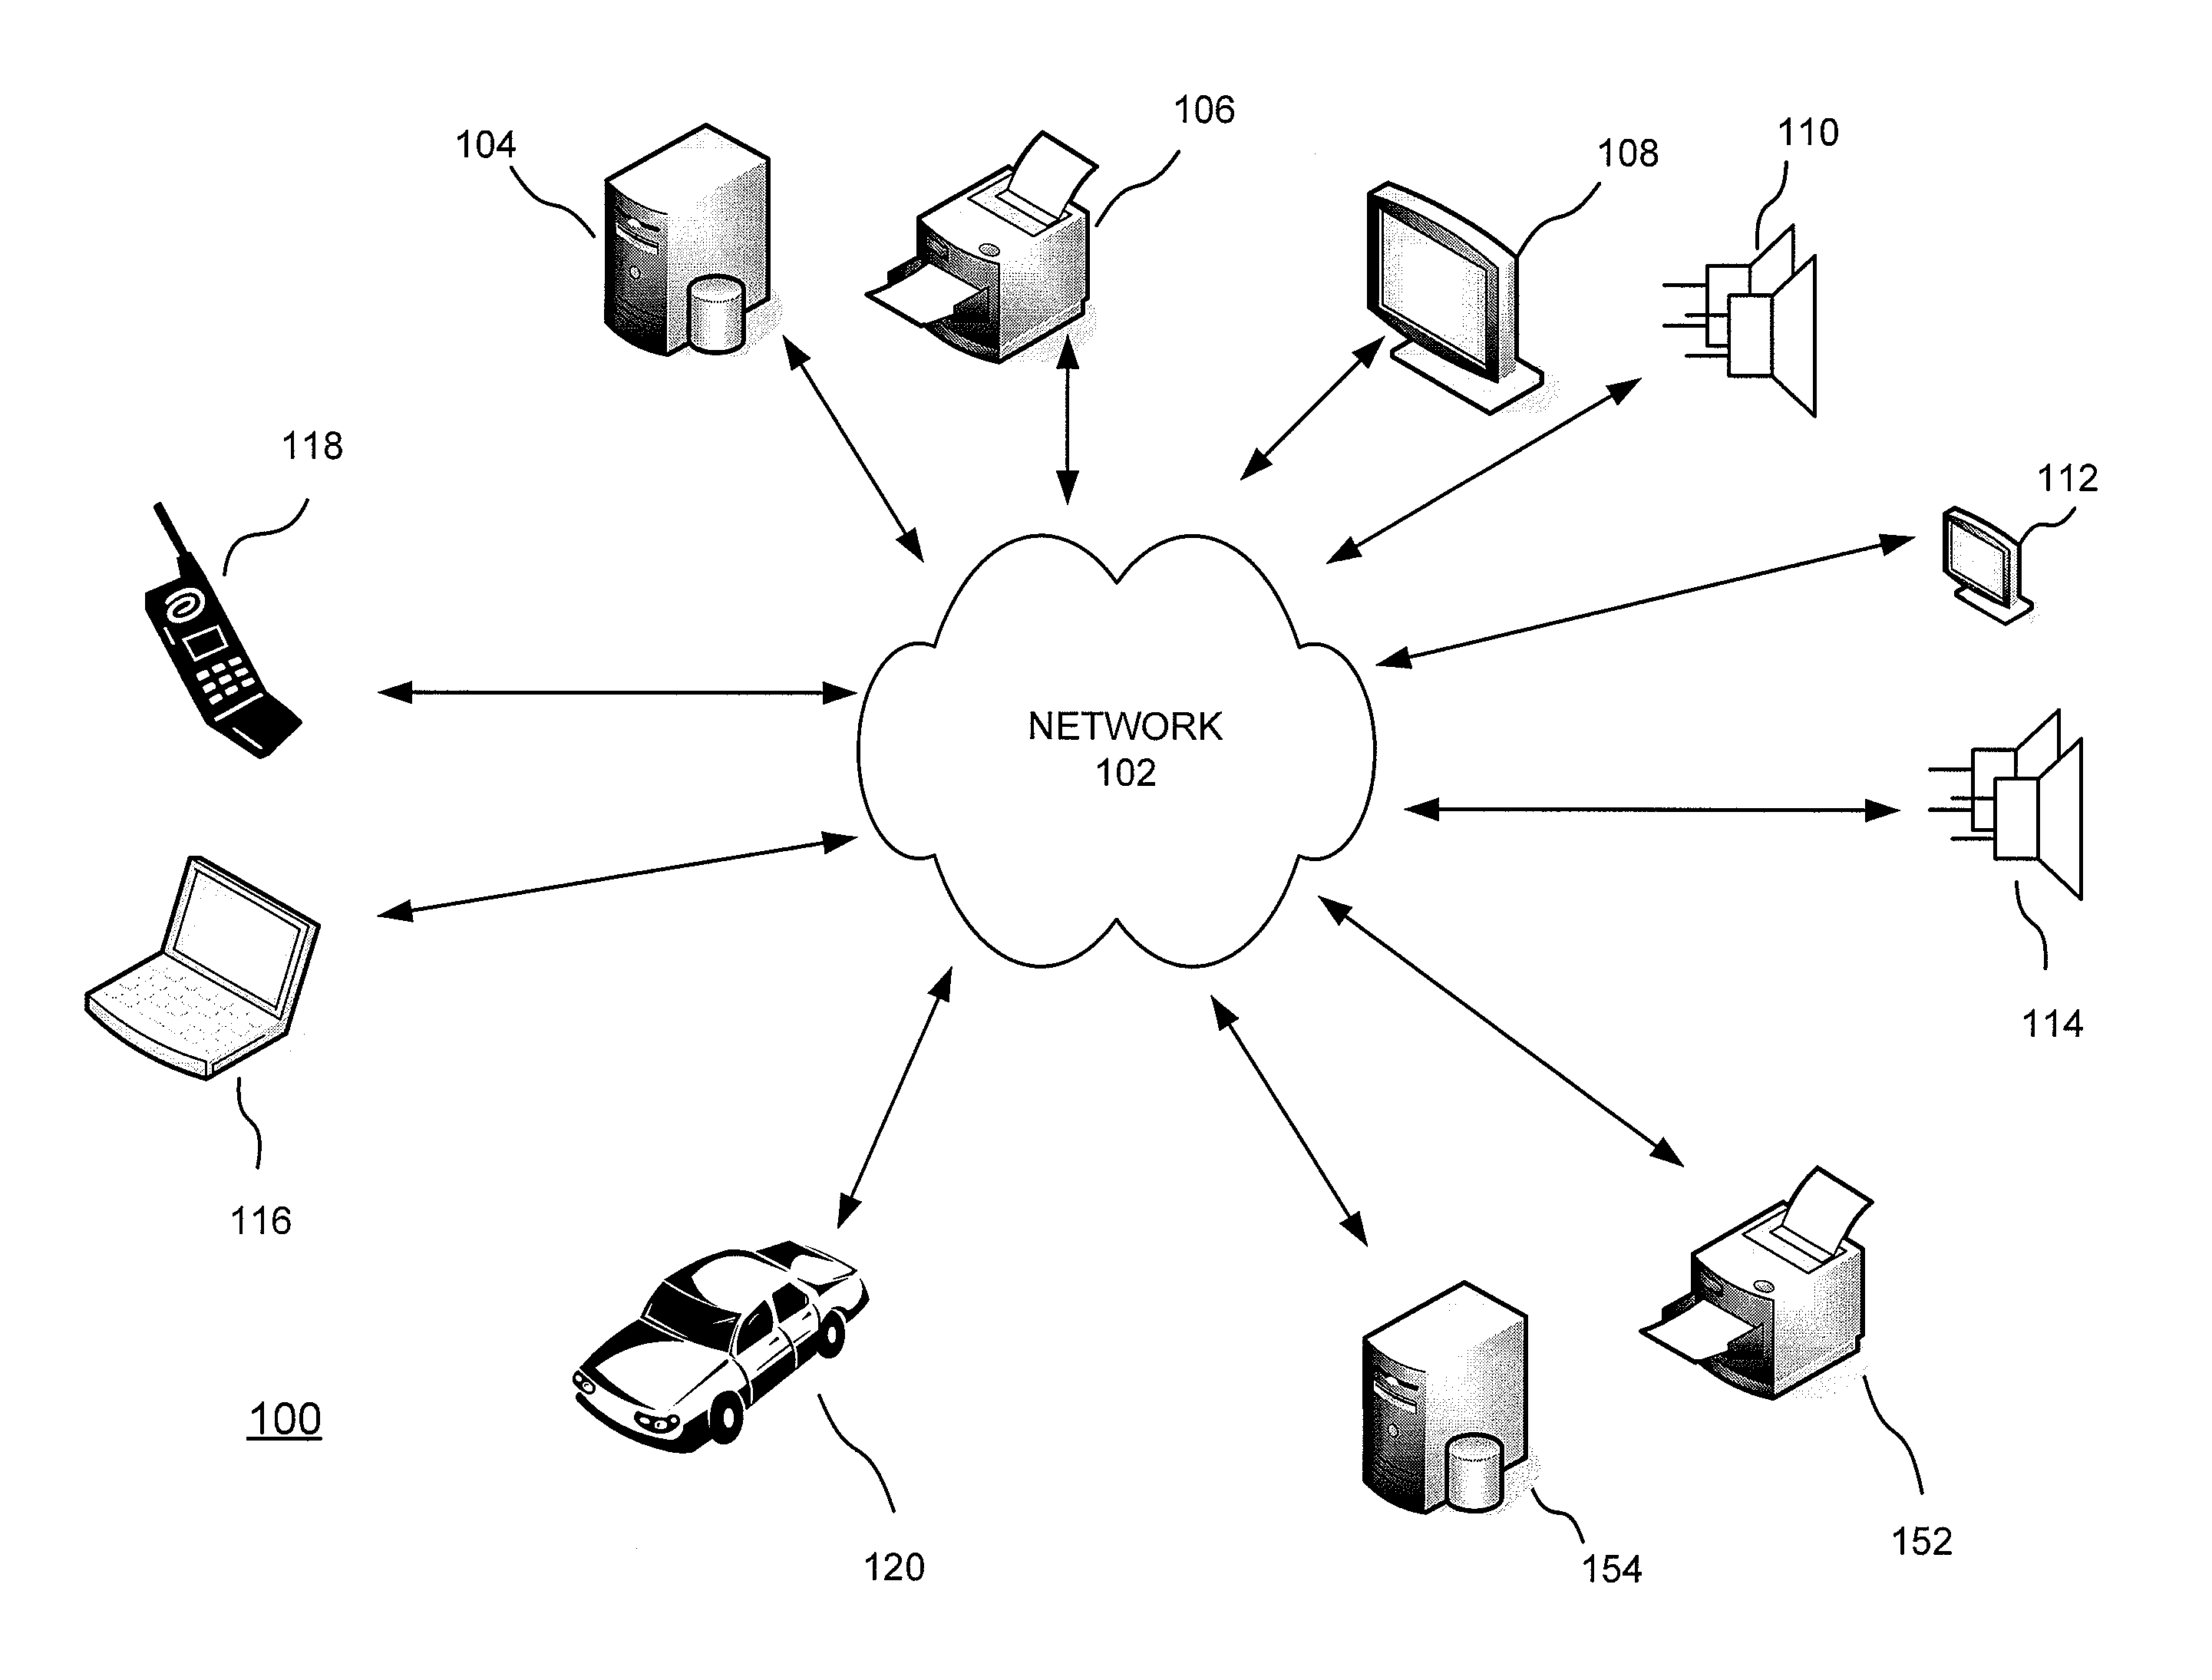 Providing services to a mobile device in a personal network